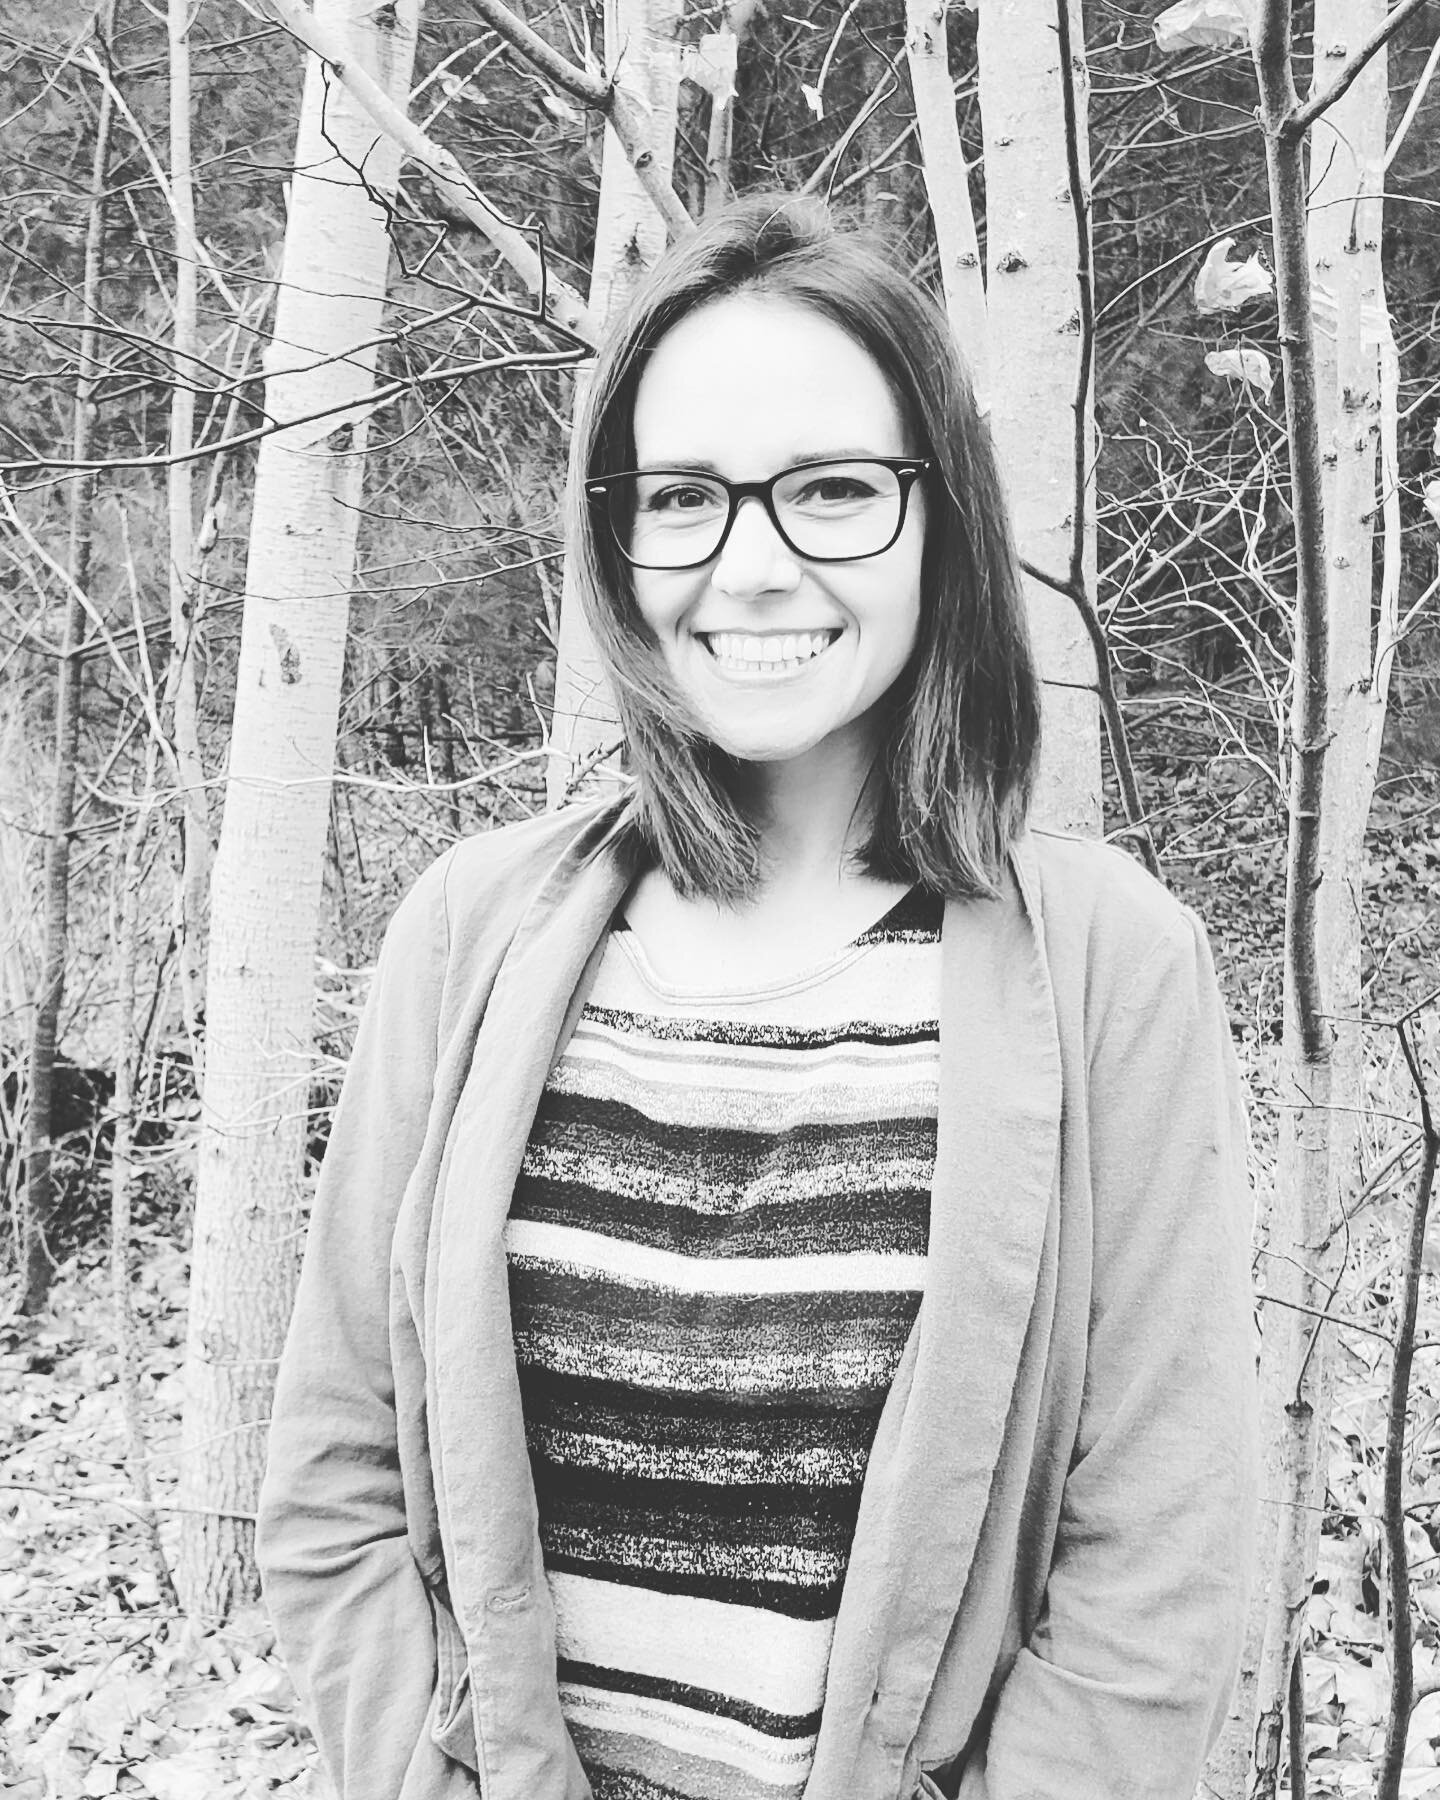 💖 @vlcounselling welcomes Kristen Jones to the practice!! 💖

Kristen is a Registered Psychotherapist (Qualifying) and has been working as a counsellor for three years. She has completed a Bachelor of Arts from Brock University, a Post-Graduate degr